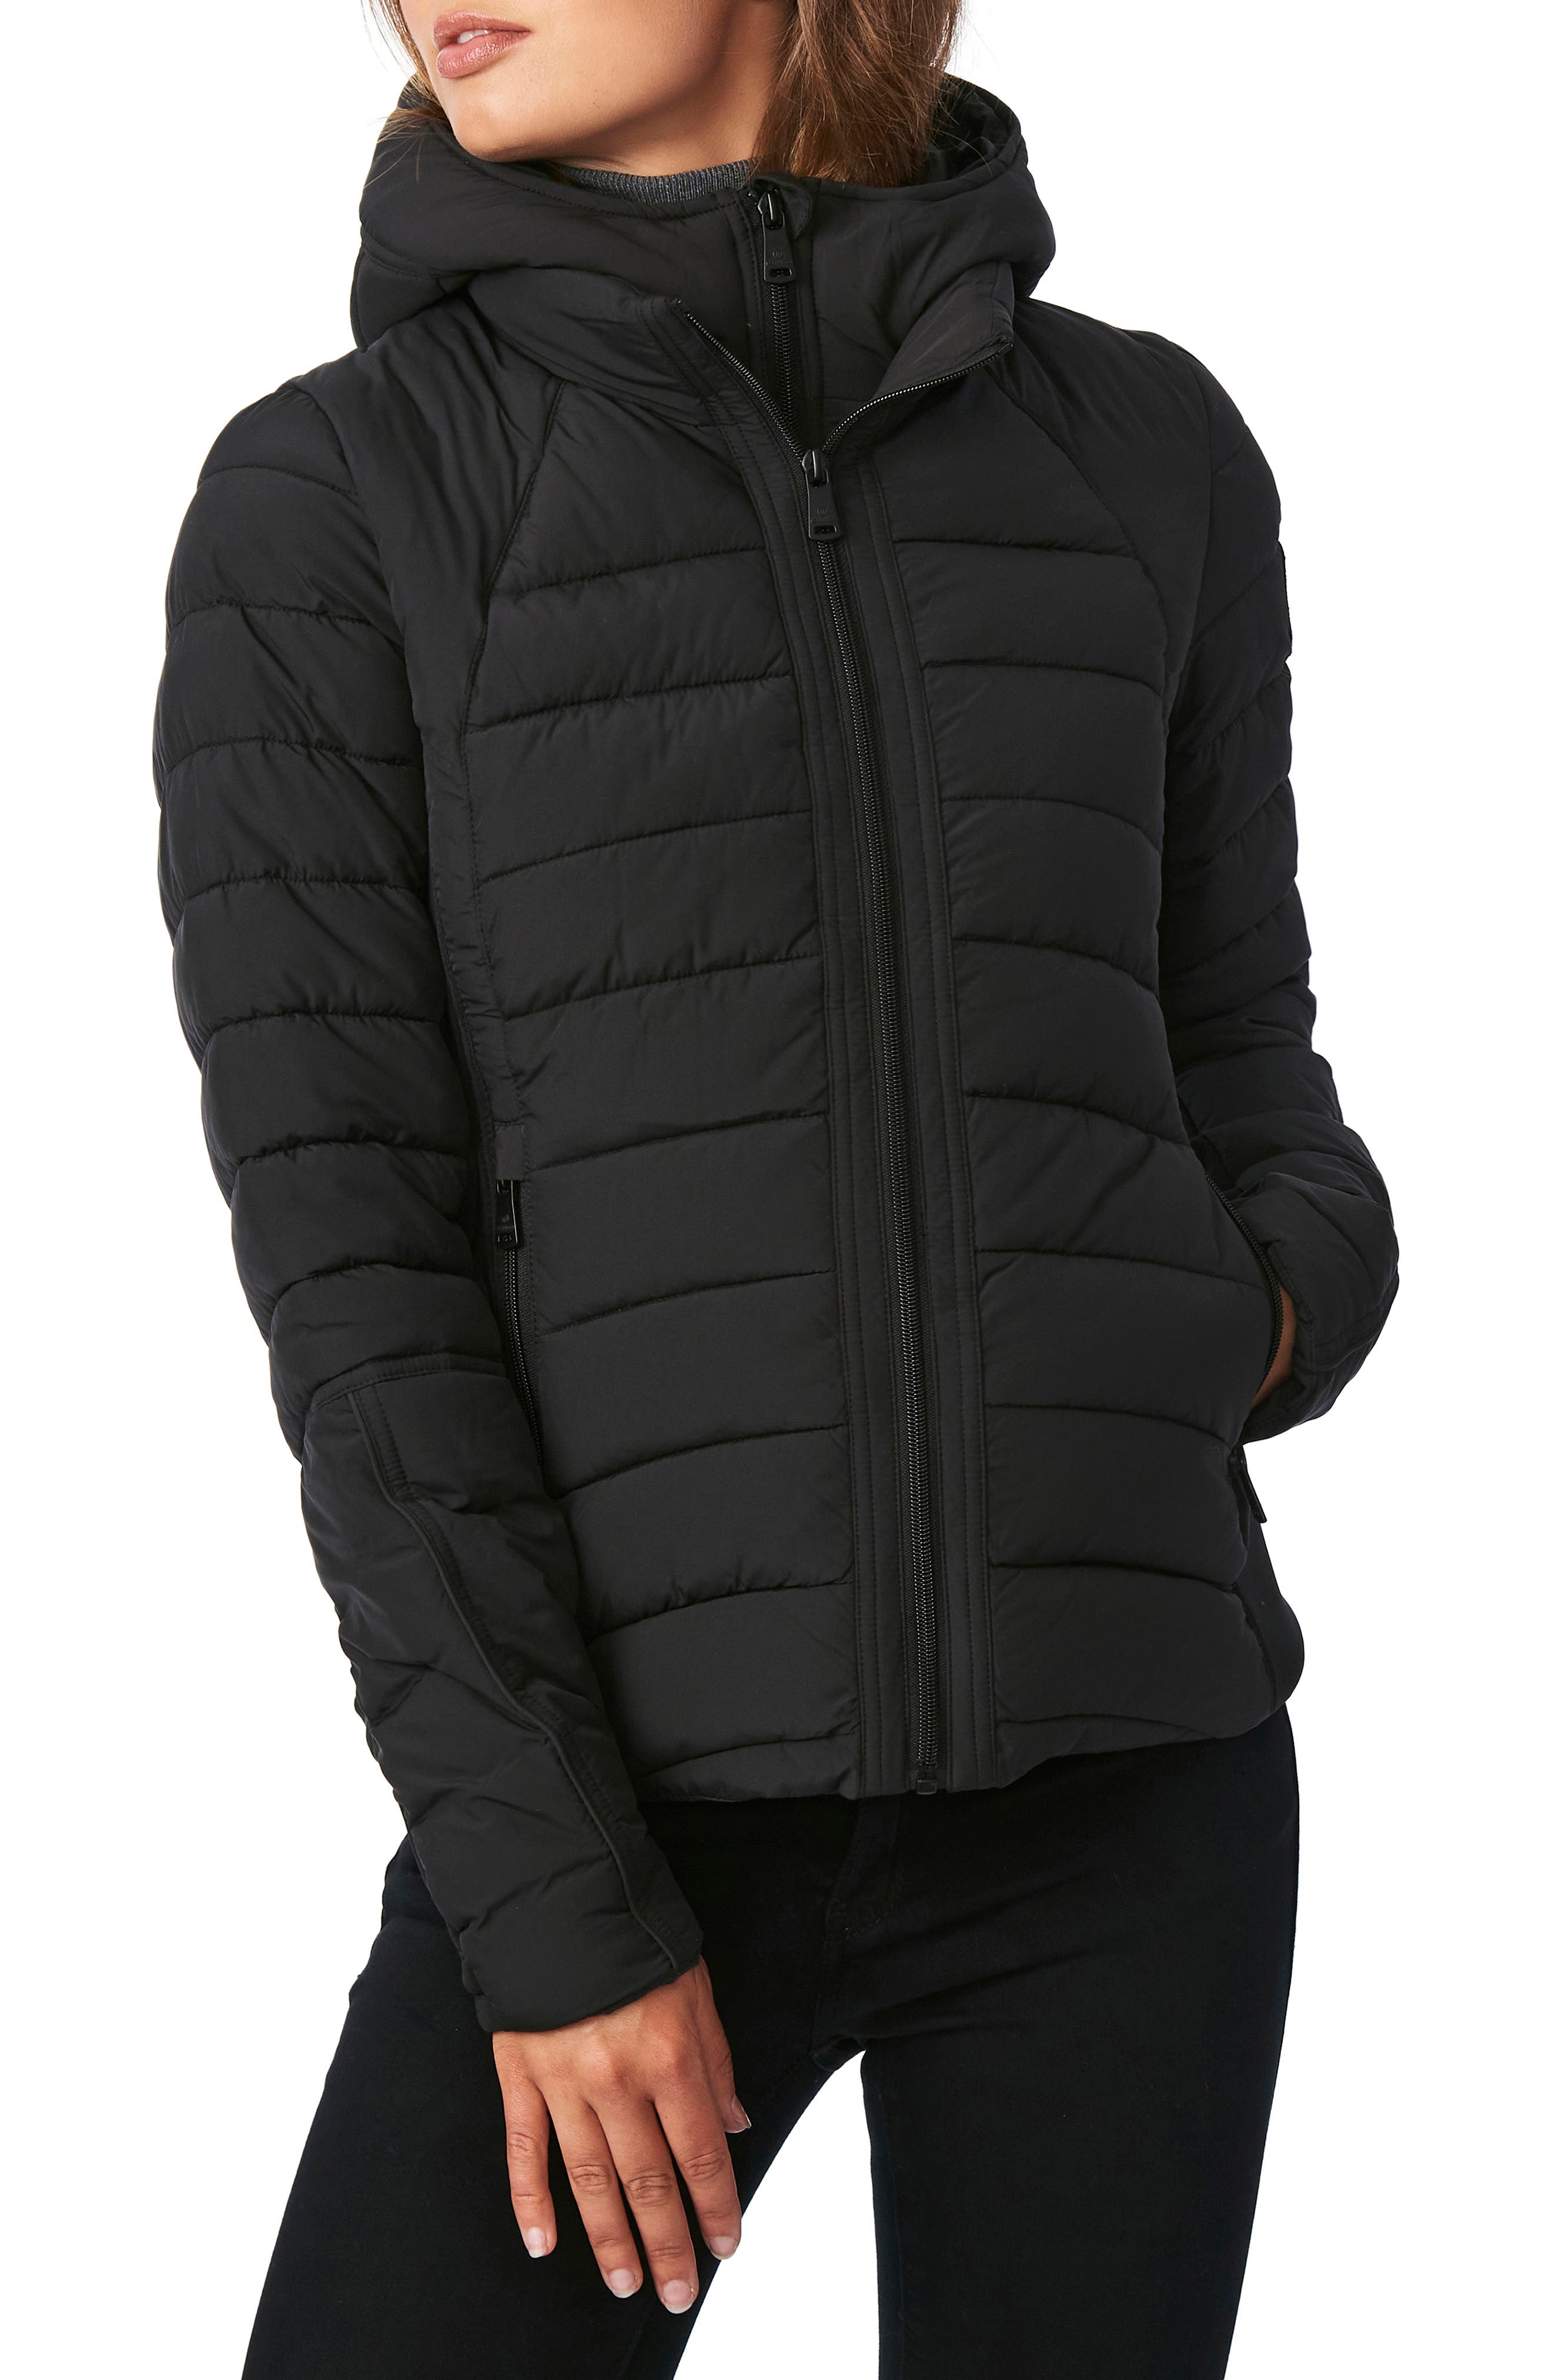 womens black puffer jacket with hood